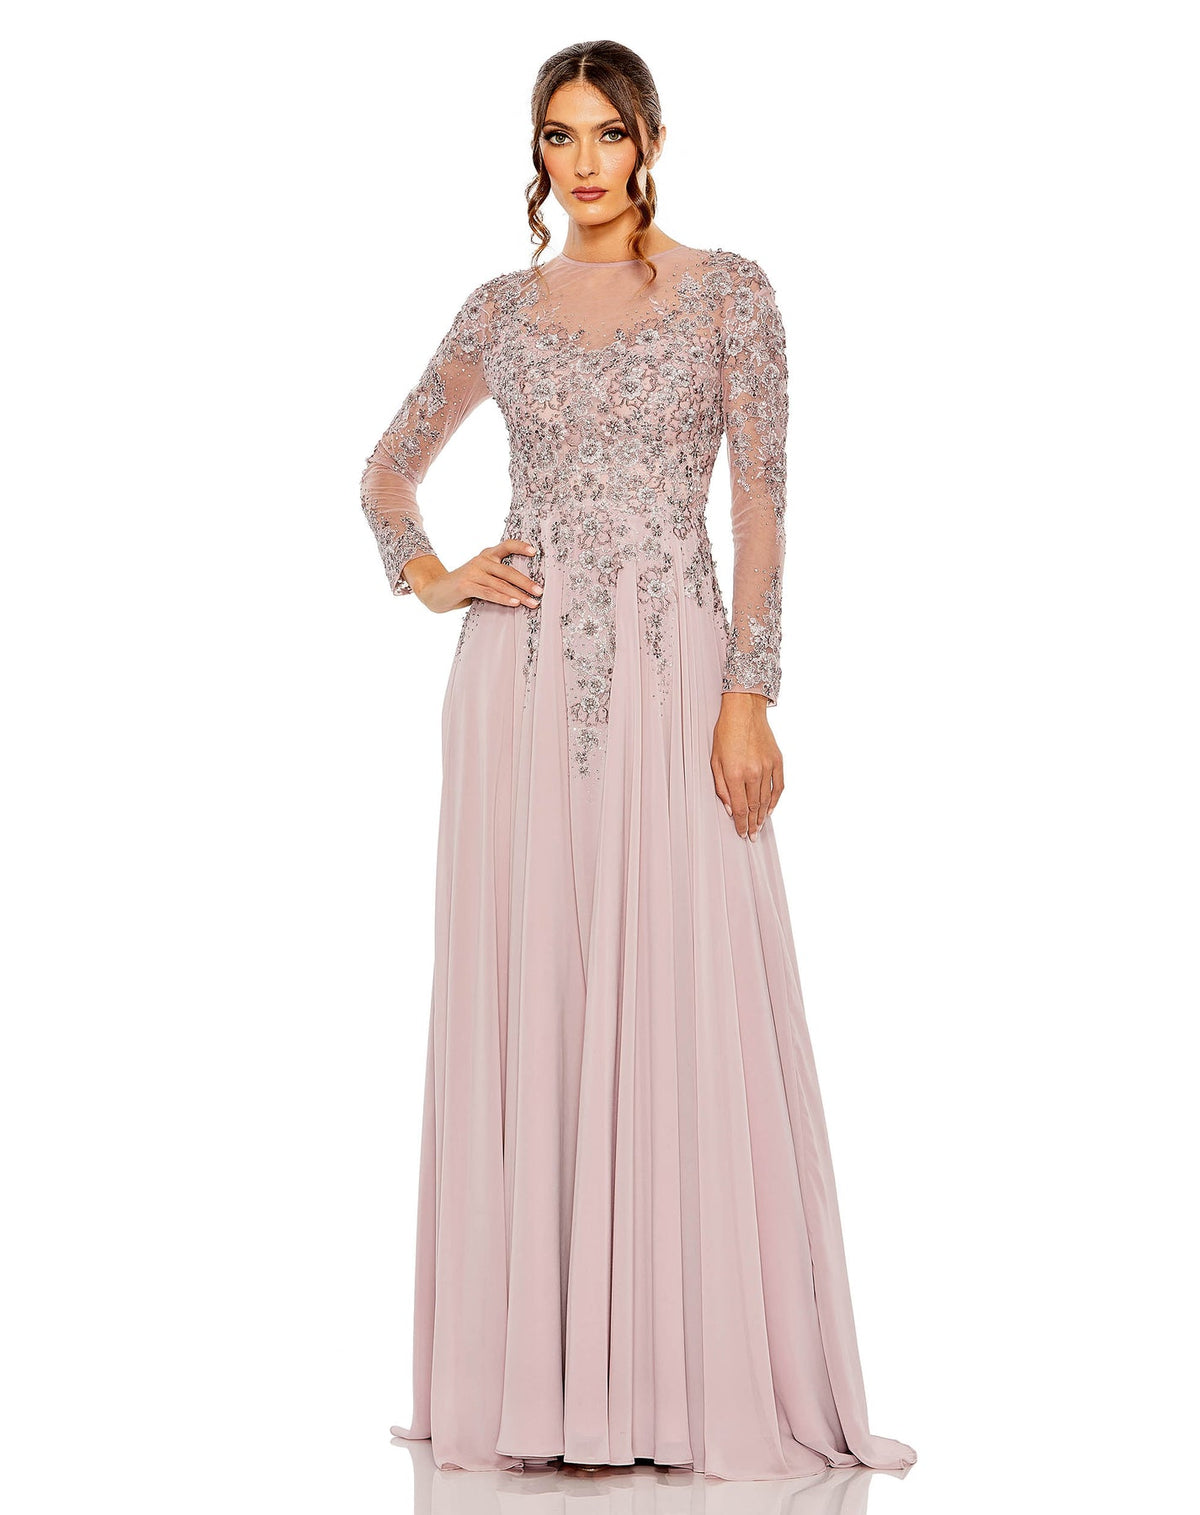 High neck long sleeve crystal embellished A Line gown - Lilac